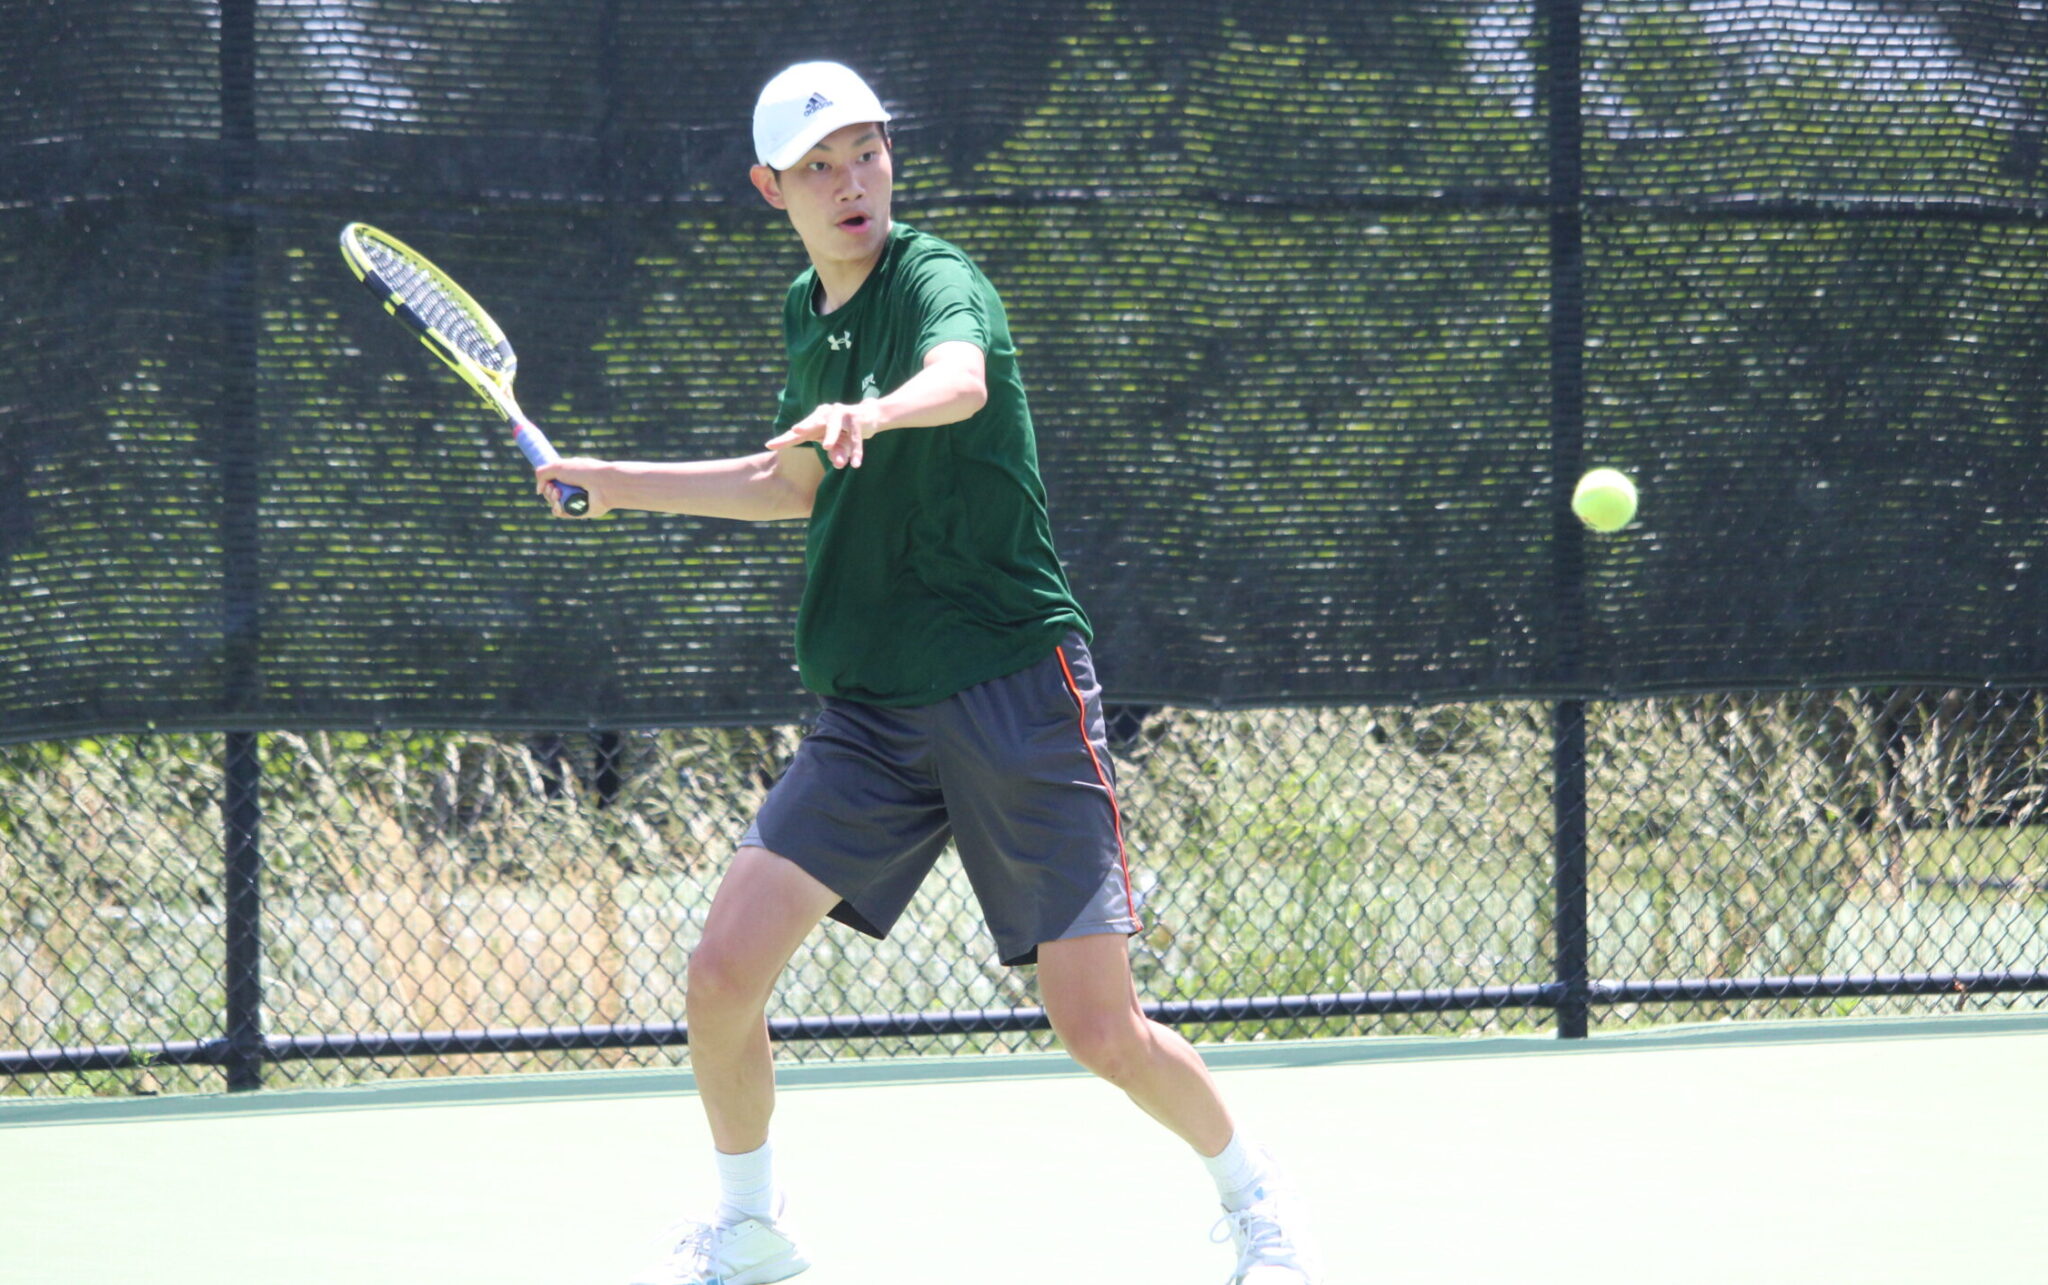 Archmere freshman Andy Zhu knocks off top seed to win DIAA tennis first